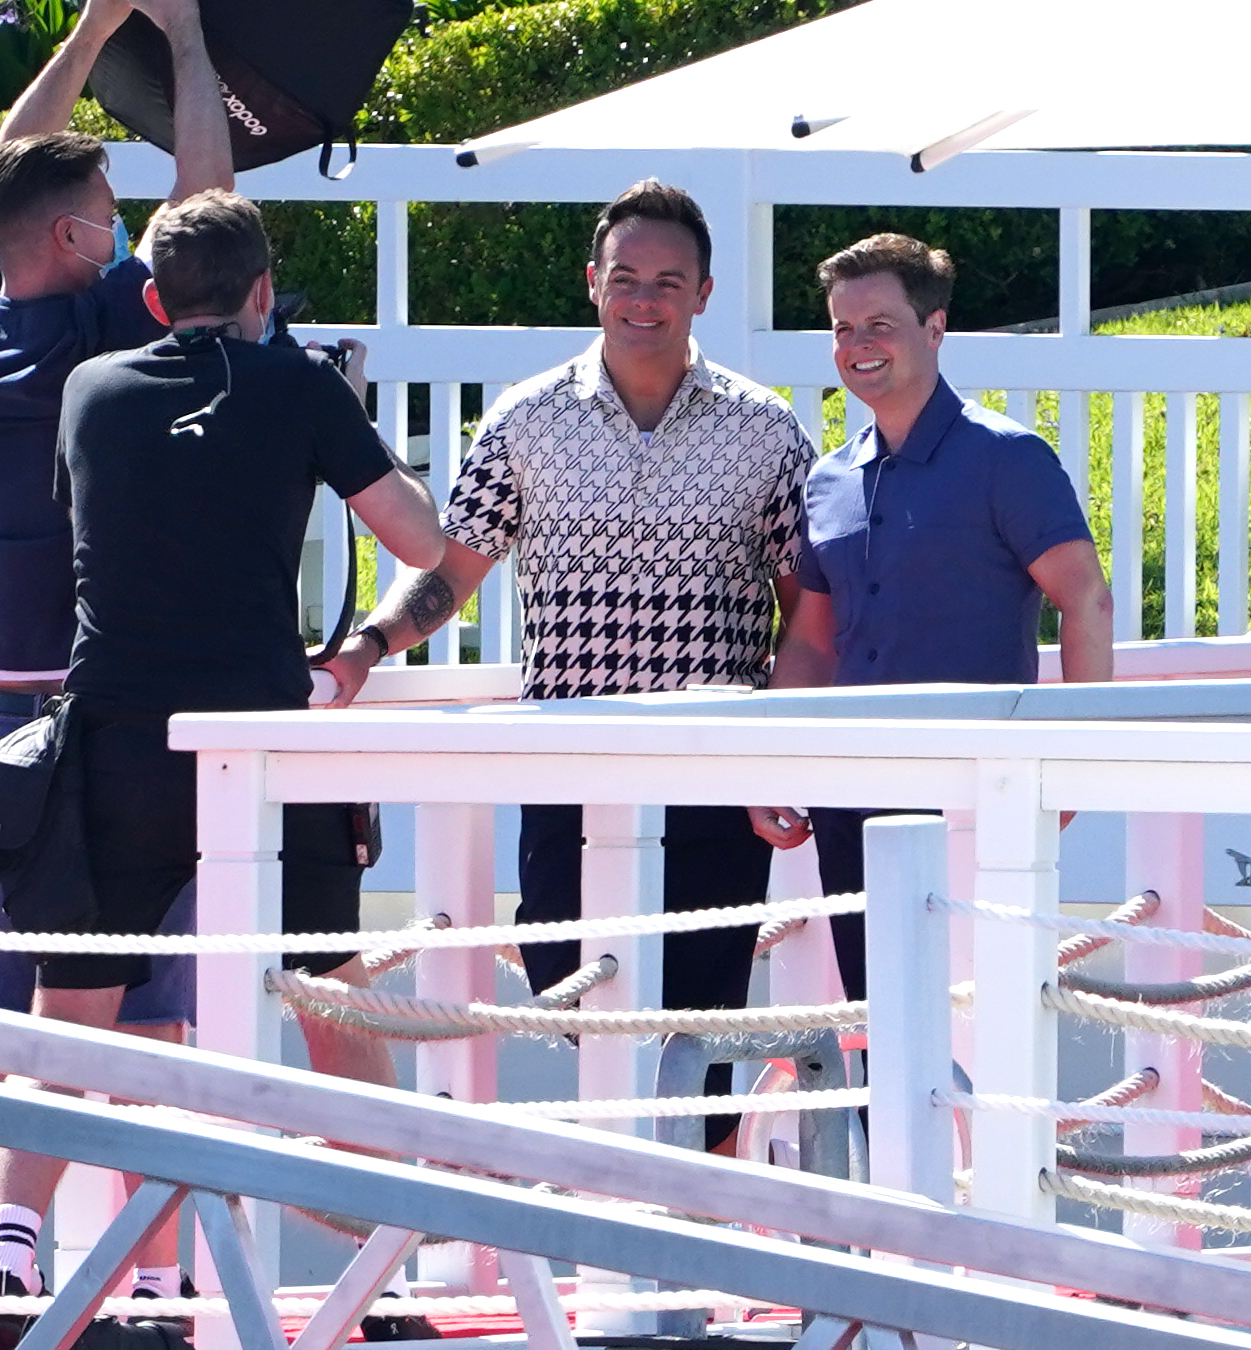 I’m A Celeb stars seen meeting for the first time as Ant and Dec record the first show of the series in Australia